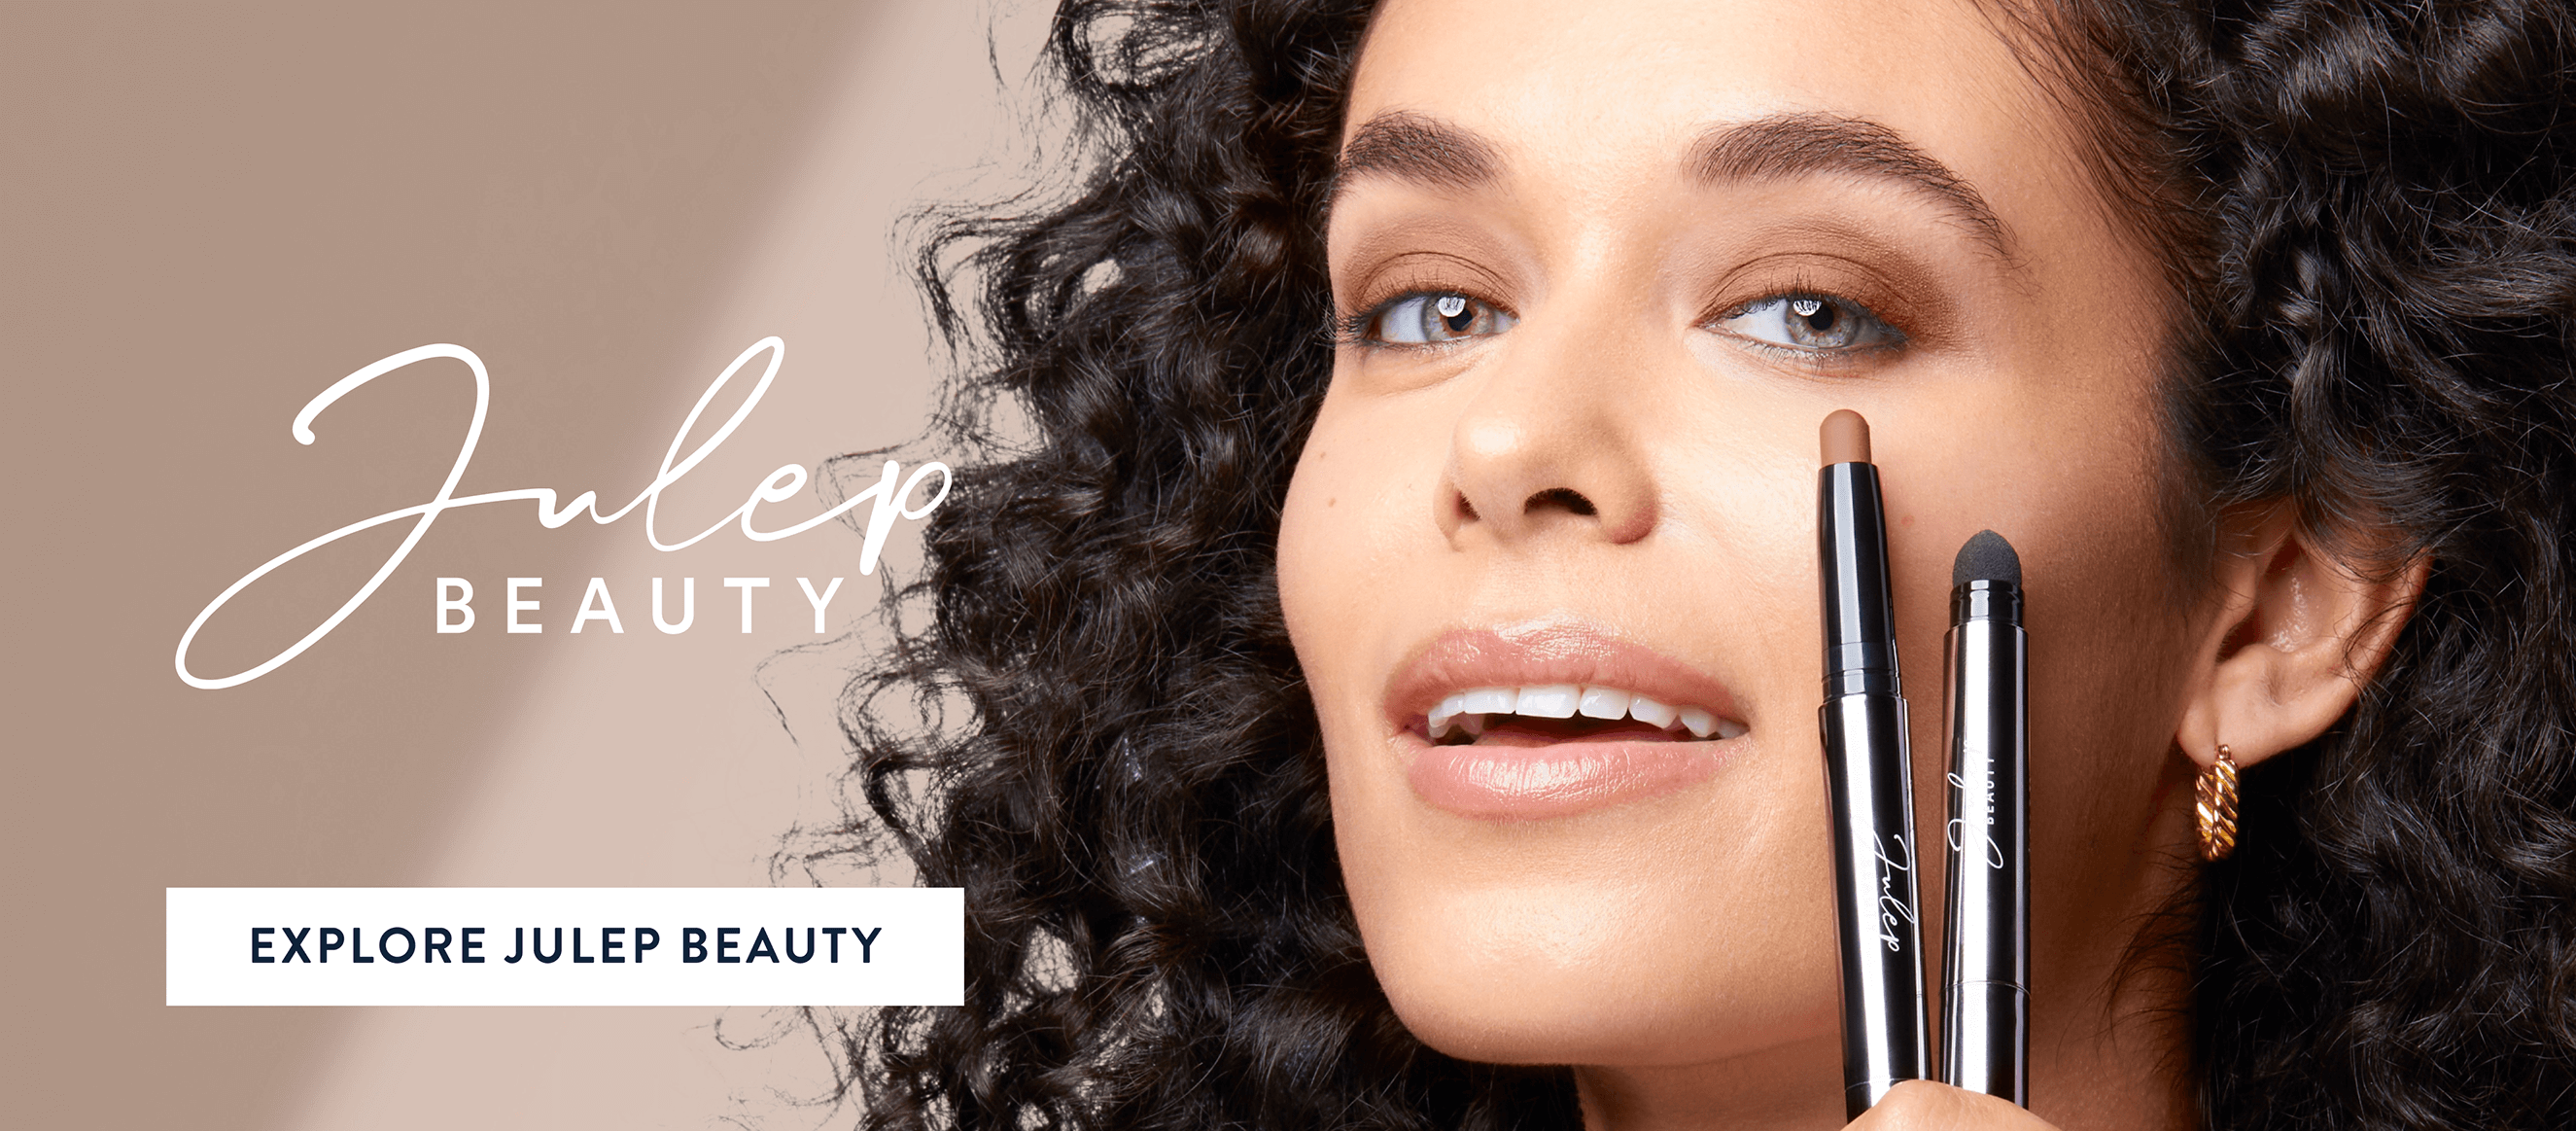 Julep beauty. clean beauty at affordable prices. Explore Julep Beauty